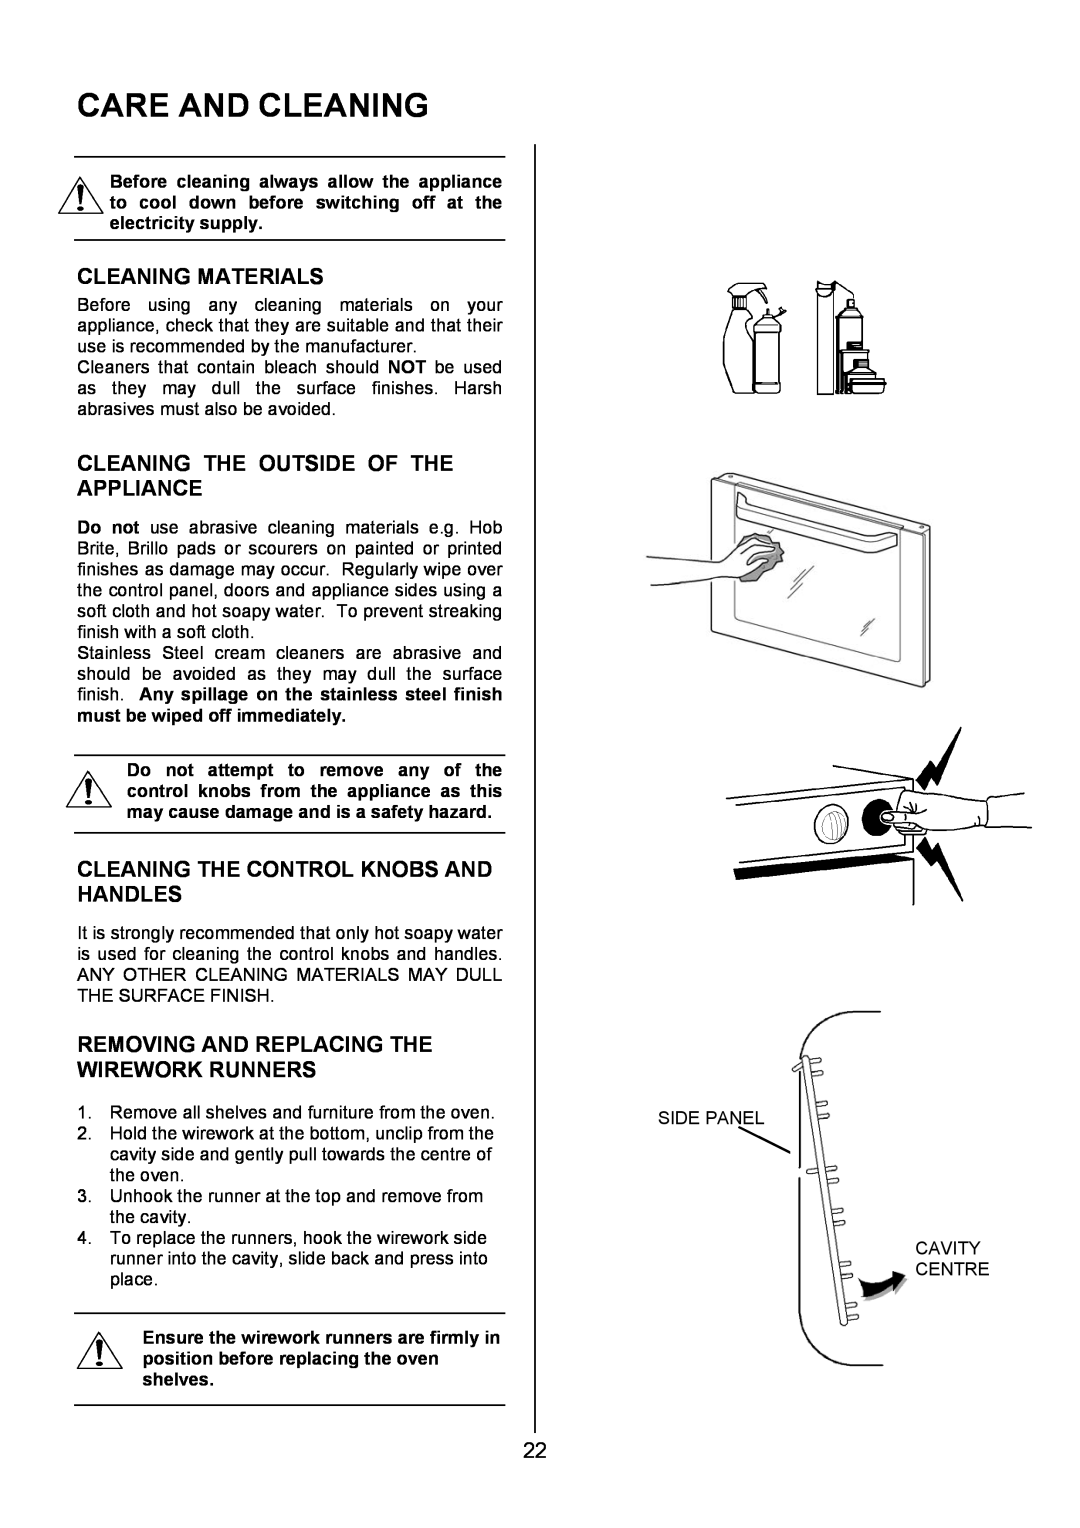 Electrolux EKG6046/EKG6047 manual Care And Cleaning, Cleaning Materials, Cleaning The Outside Of The Appliance 